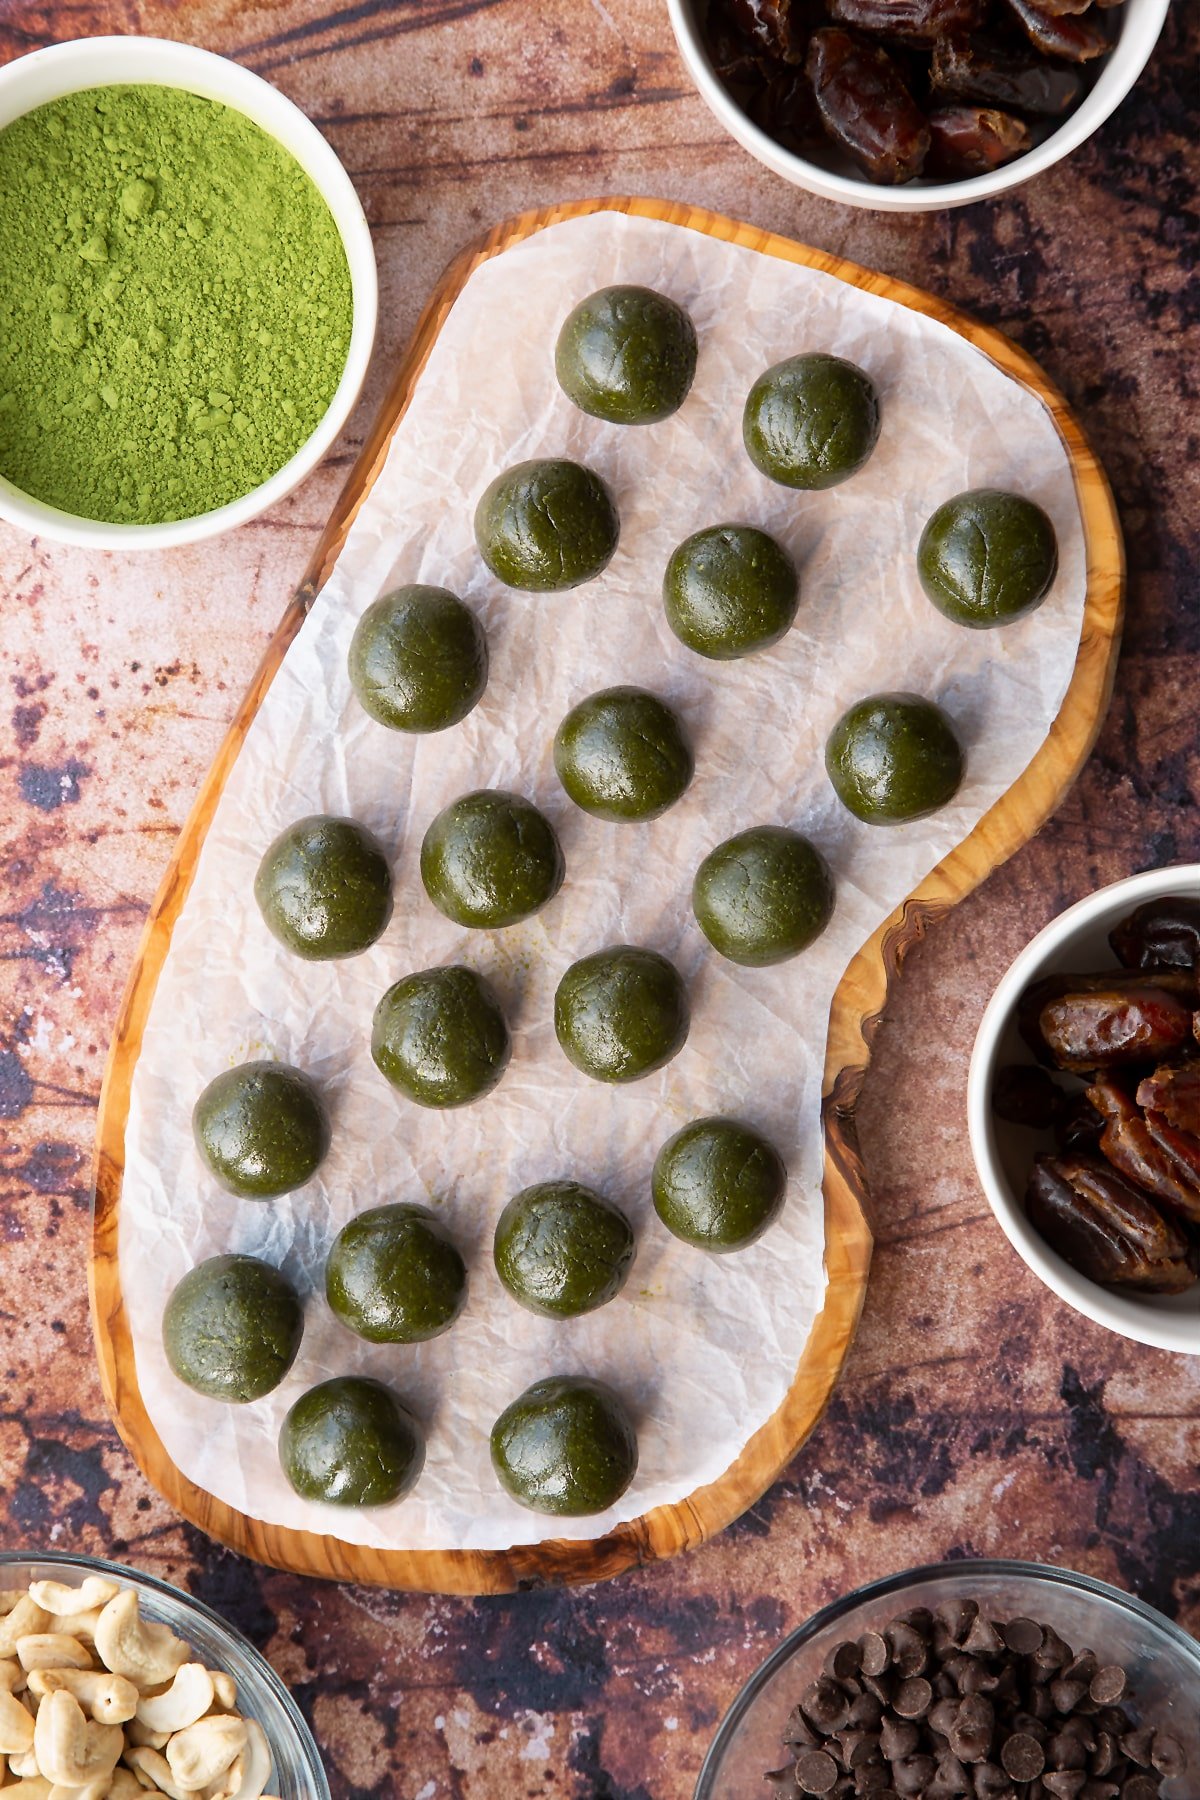 Matcha protein balls shown from above on a wooden board lined with baking paper. The balls are dark green.